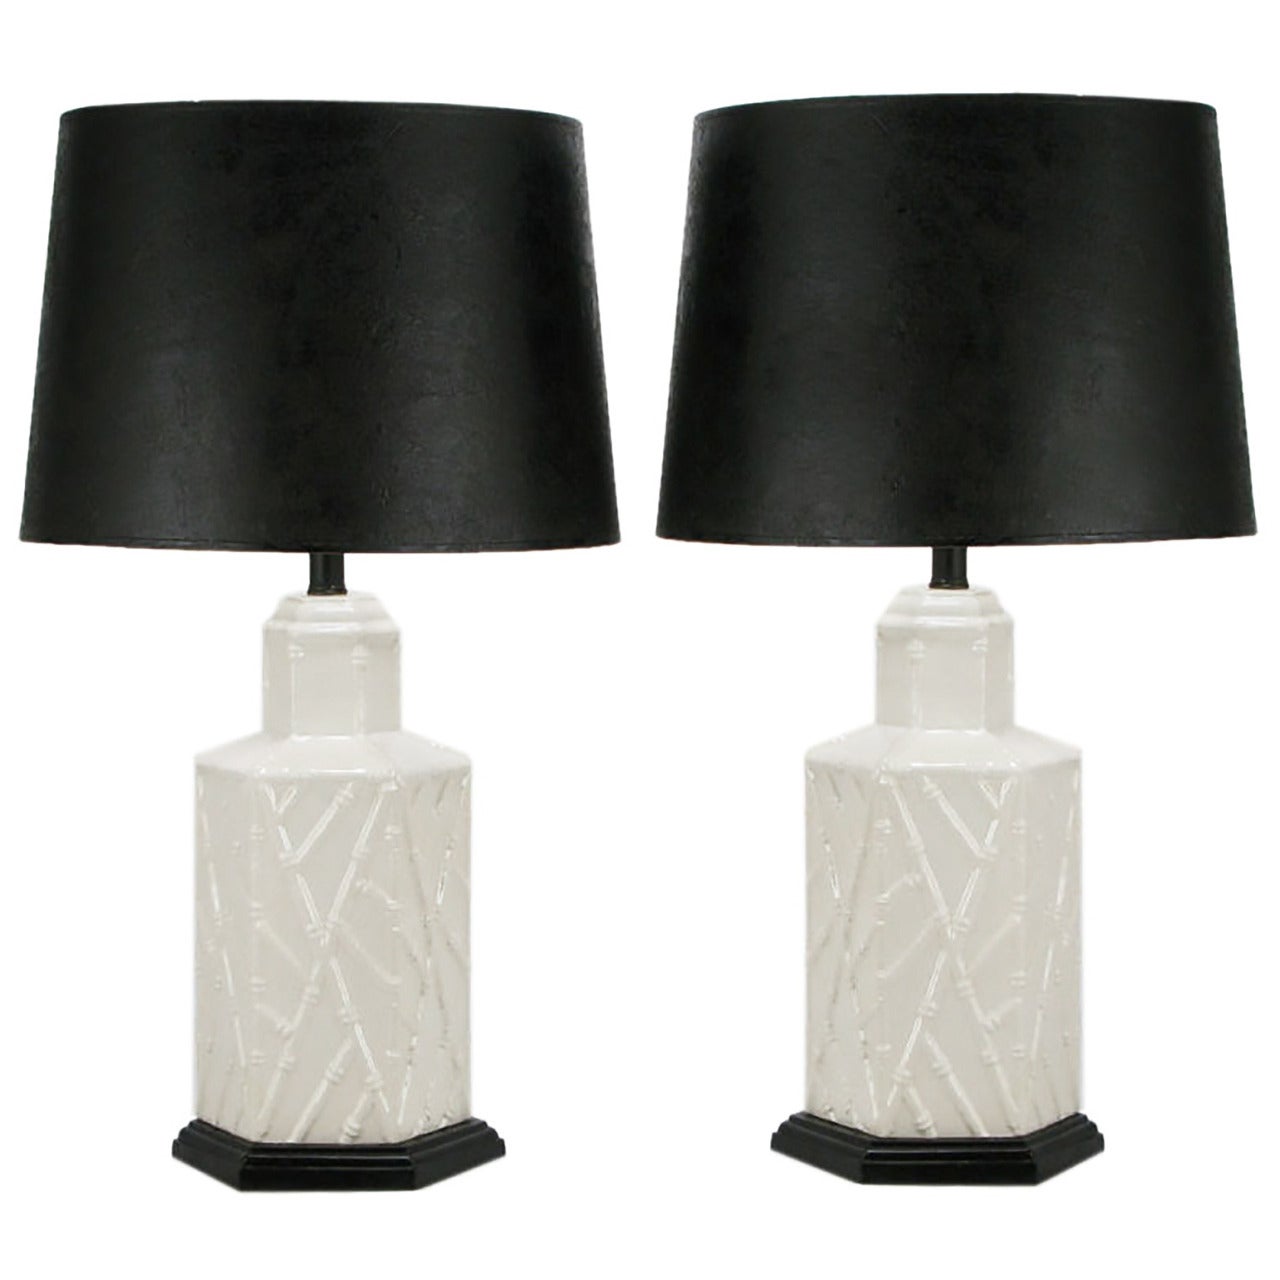 Pair of White Ceramic Hexagonal Bamboo Relief Table Lamps